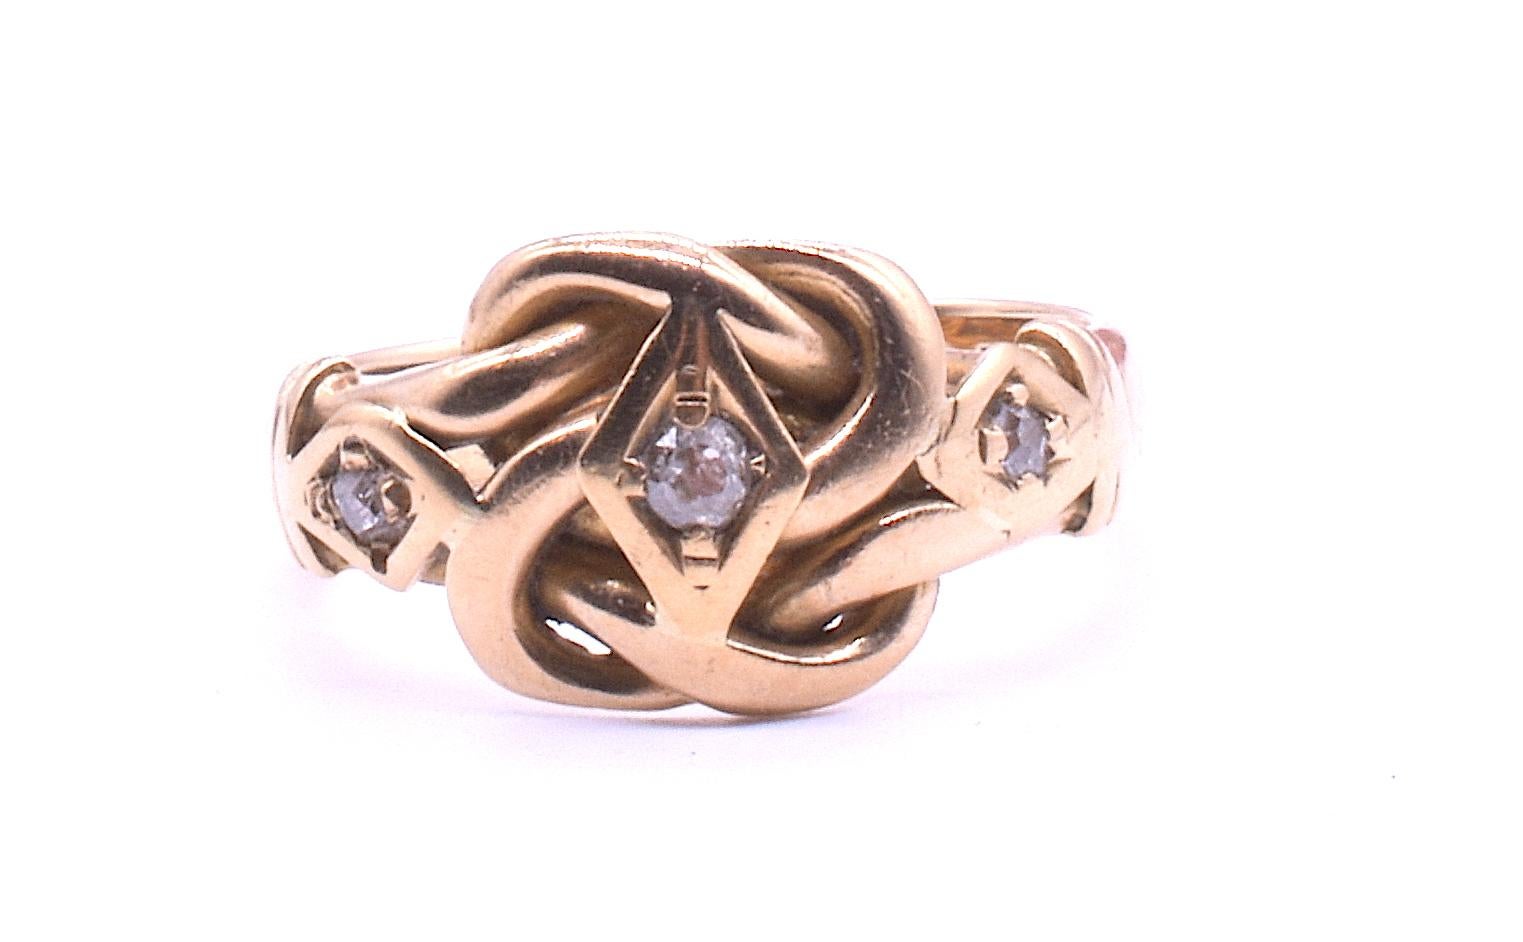 Antique 18K and diamond-studded lover's knot ring with nice clear hallmarks for Chester, 1909. The knot motif is a Victorian symbol of love. It continued in popularity through WWI. Our knot ring has three old mine cut diamonds embedded securely